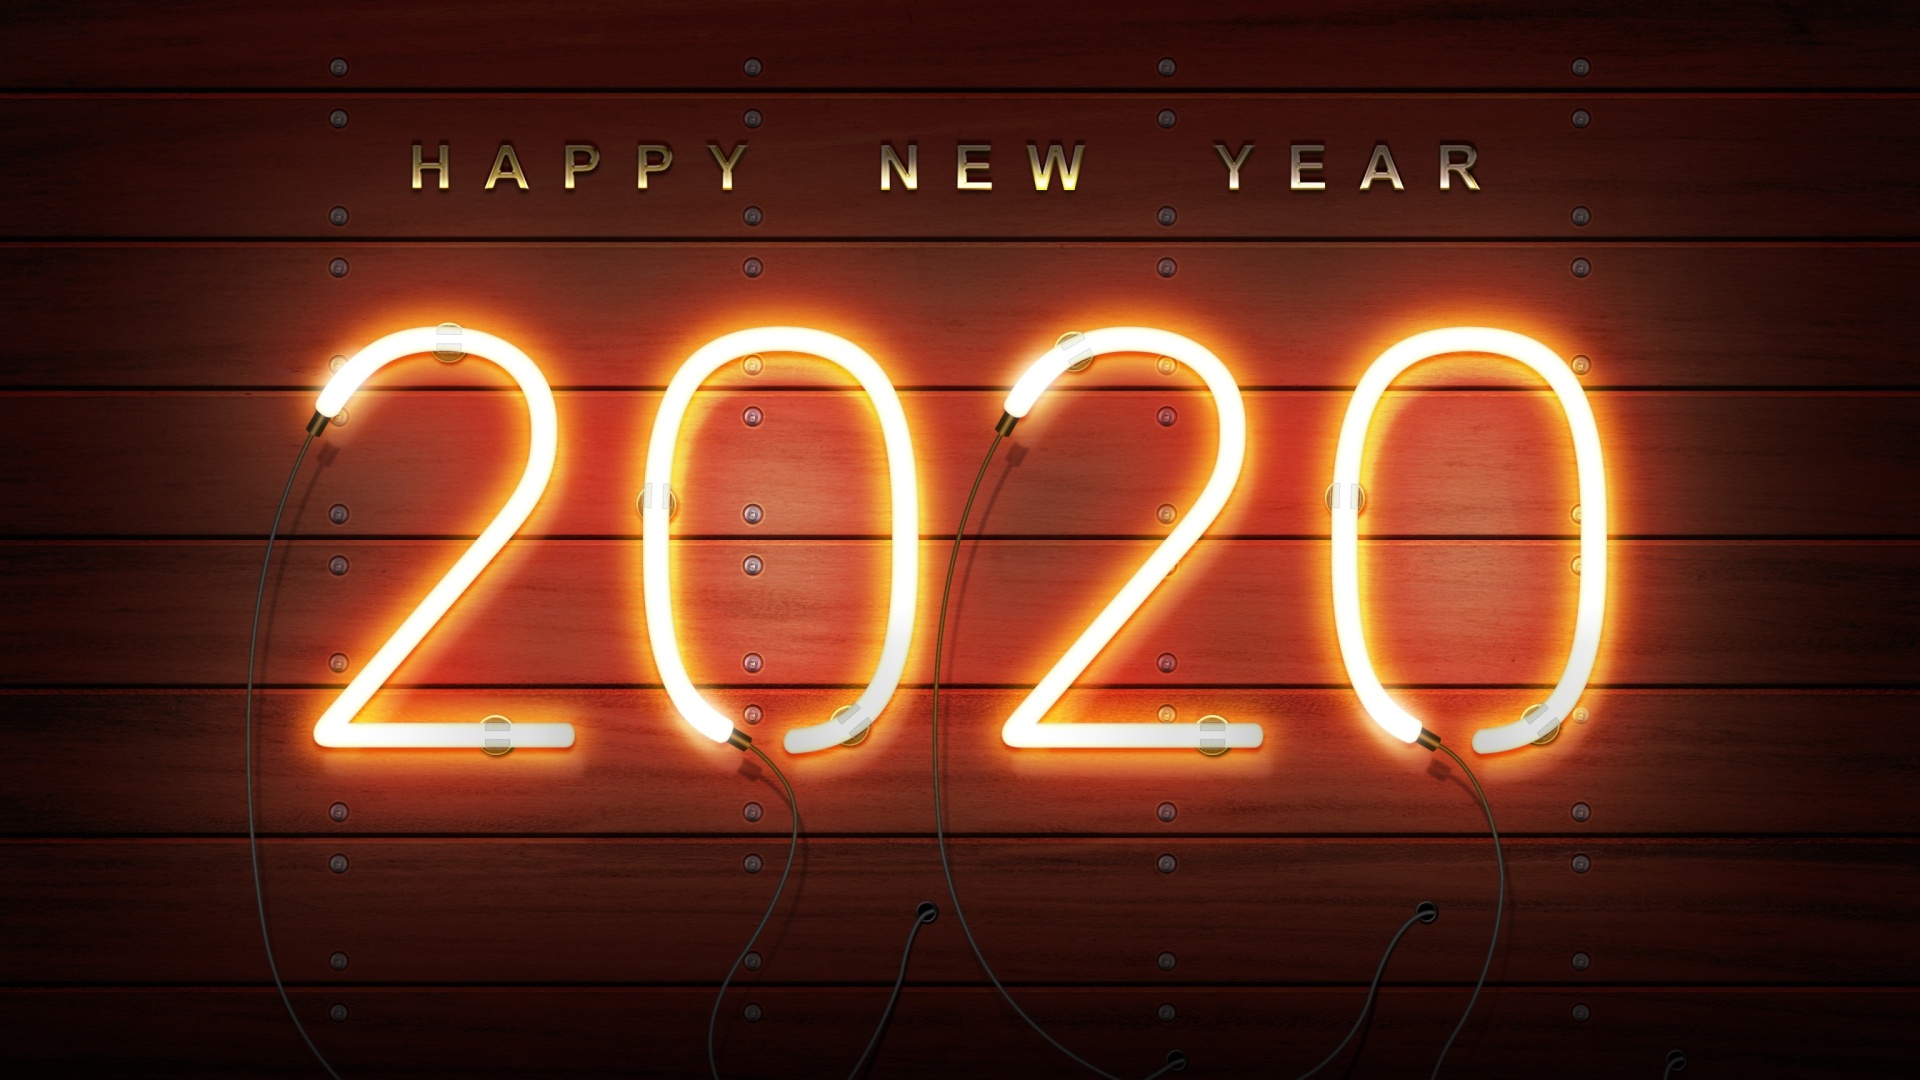 Happy New Year 2020 Wishes wallpaper 1920x1080